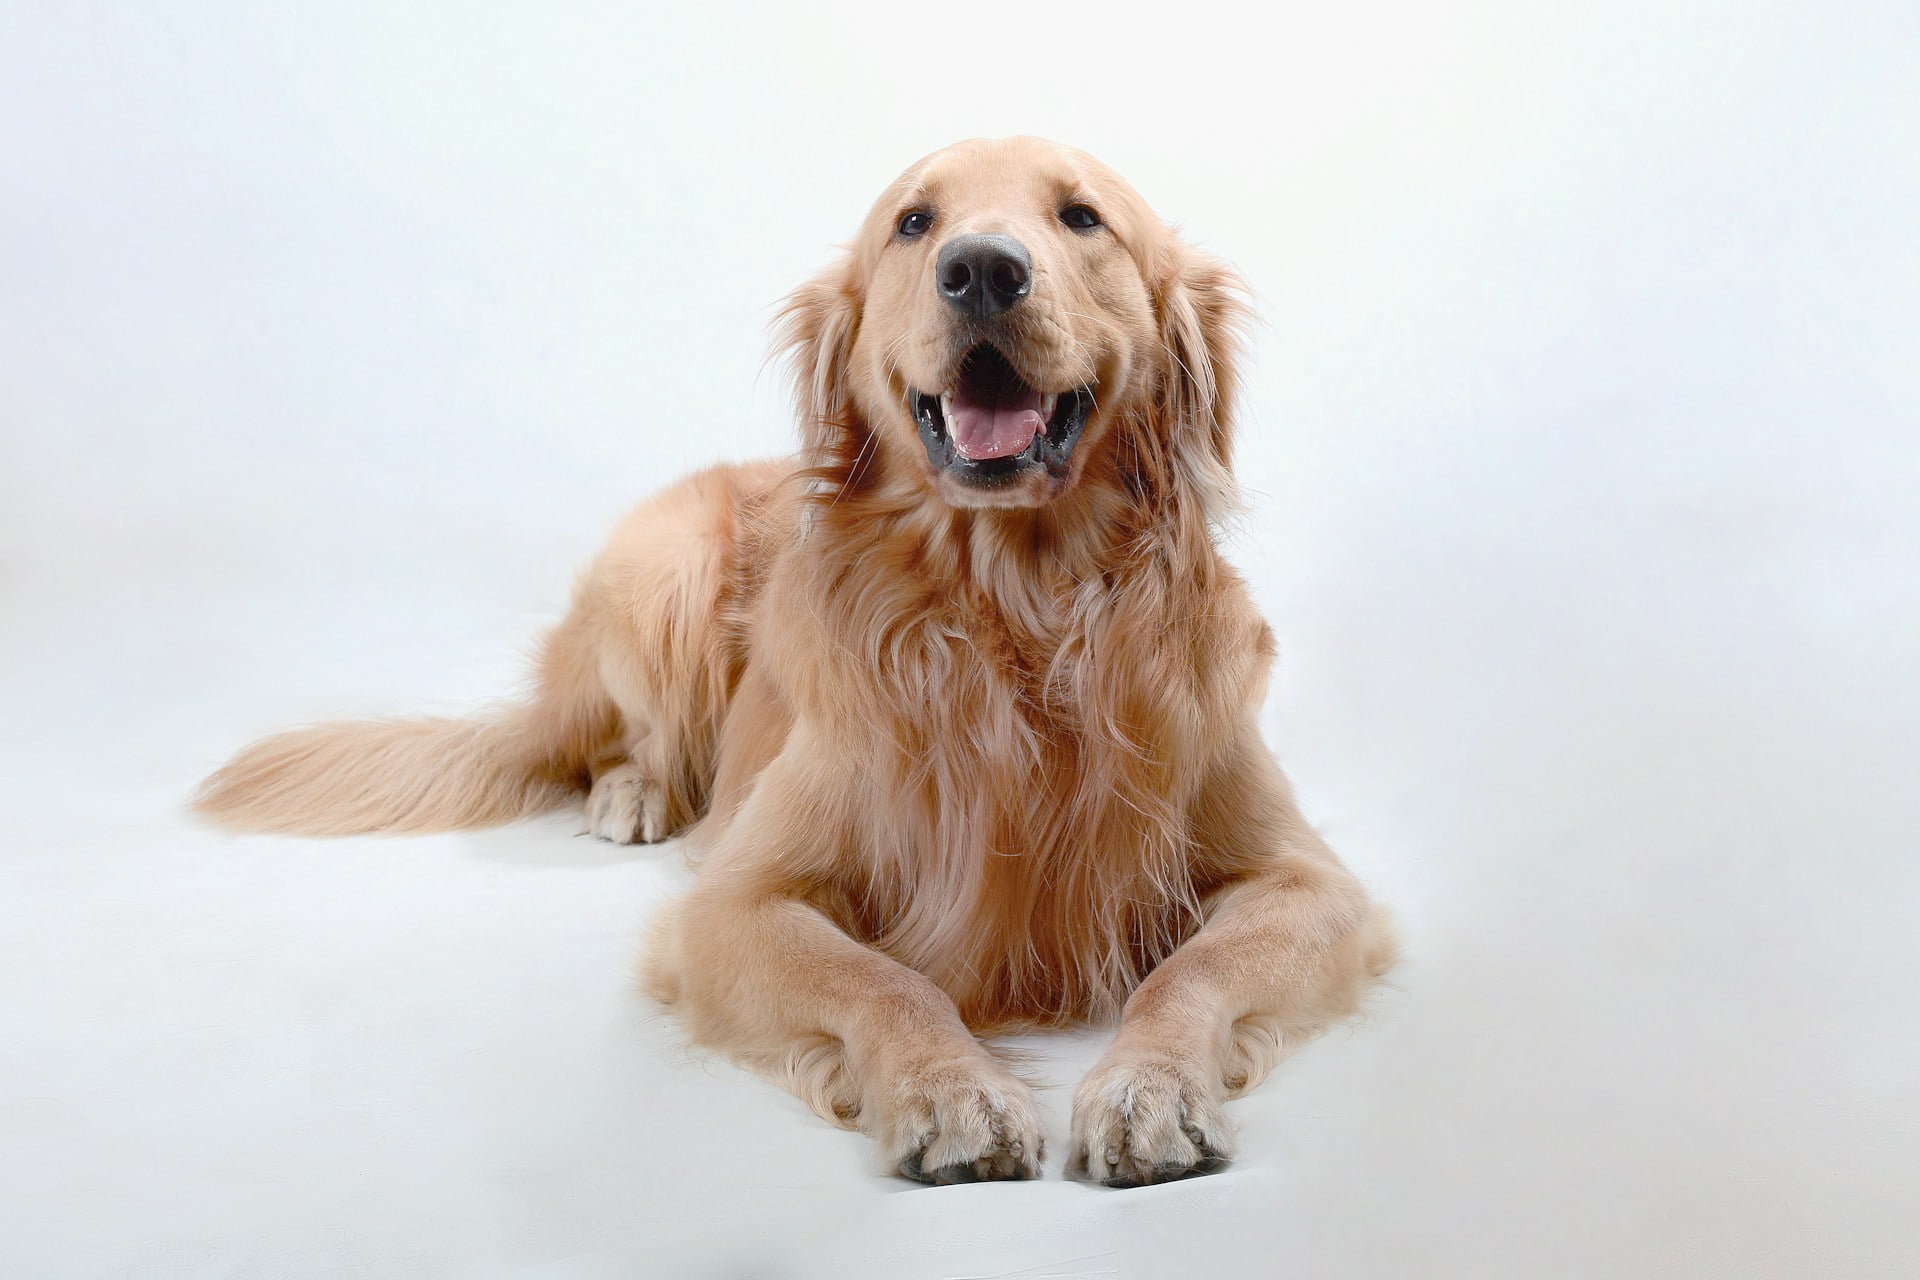 an adorable golden retriever is happy and healthy since his dog parents give him the top basic dog needs